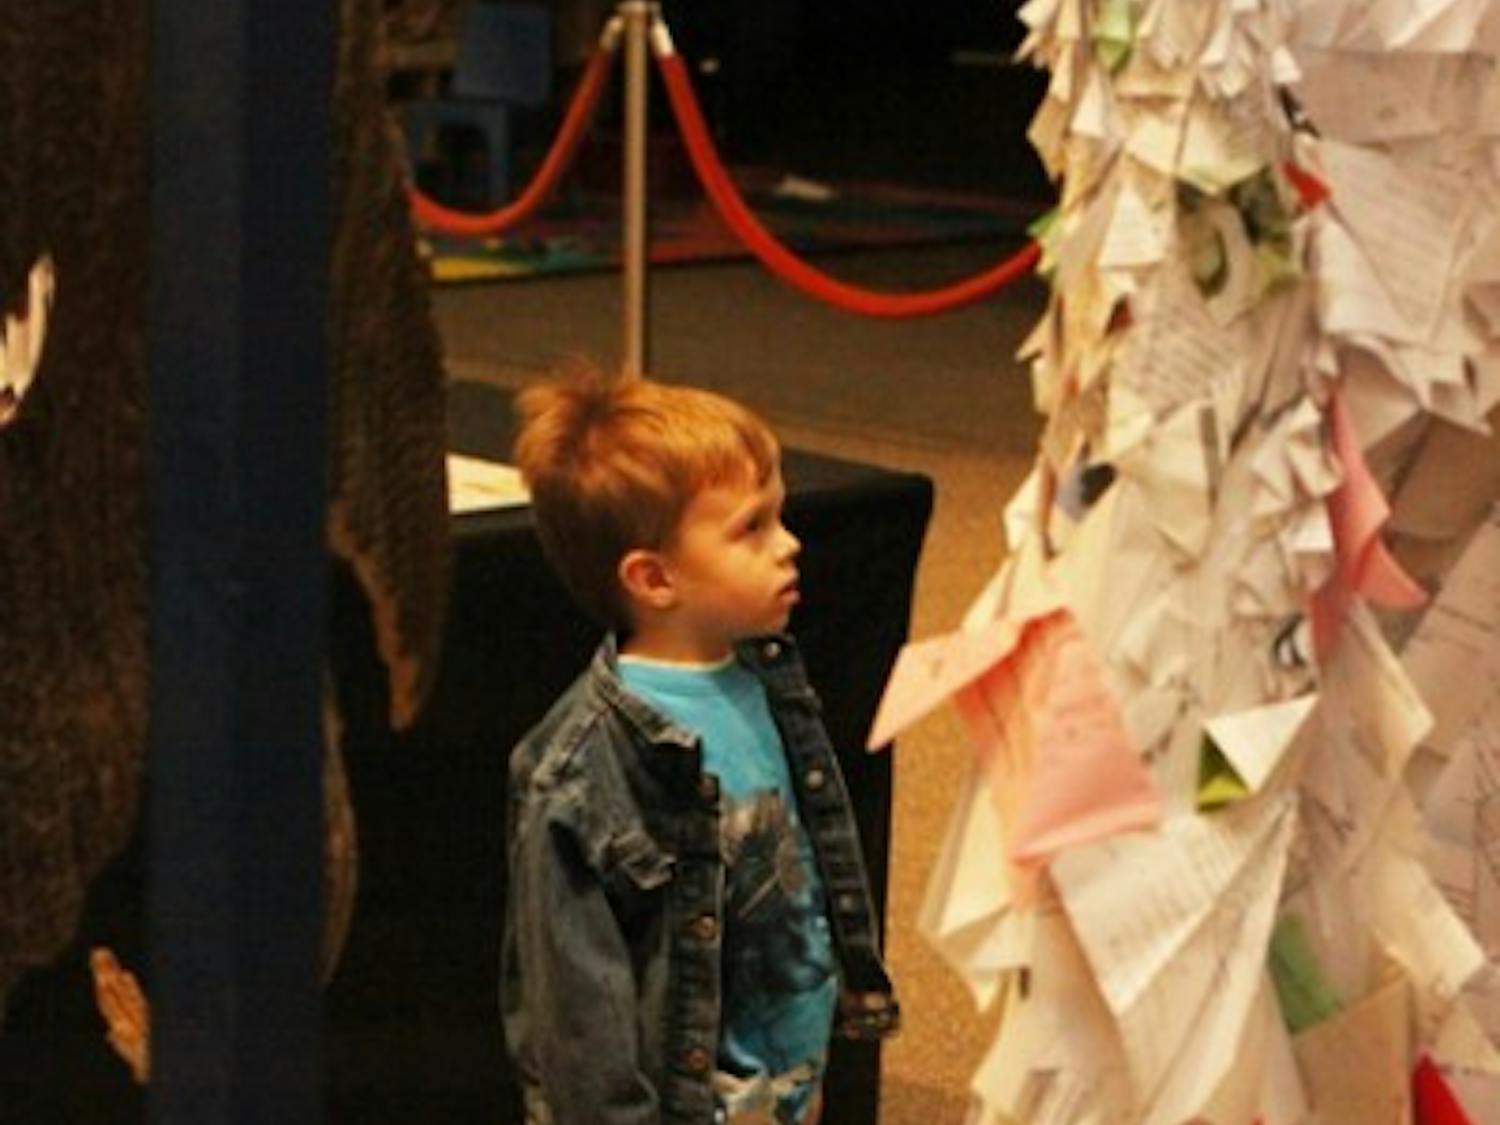 Alex Britch, 3, looks at dresses made of recycled papers and bags at the student recycled-art competition, Trashformations, at the Florida Museum of Natural History on Friday.